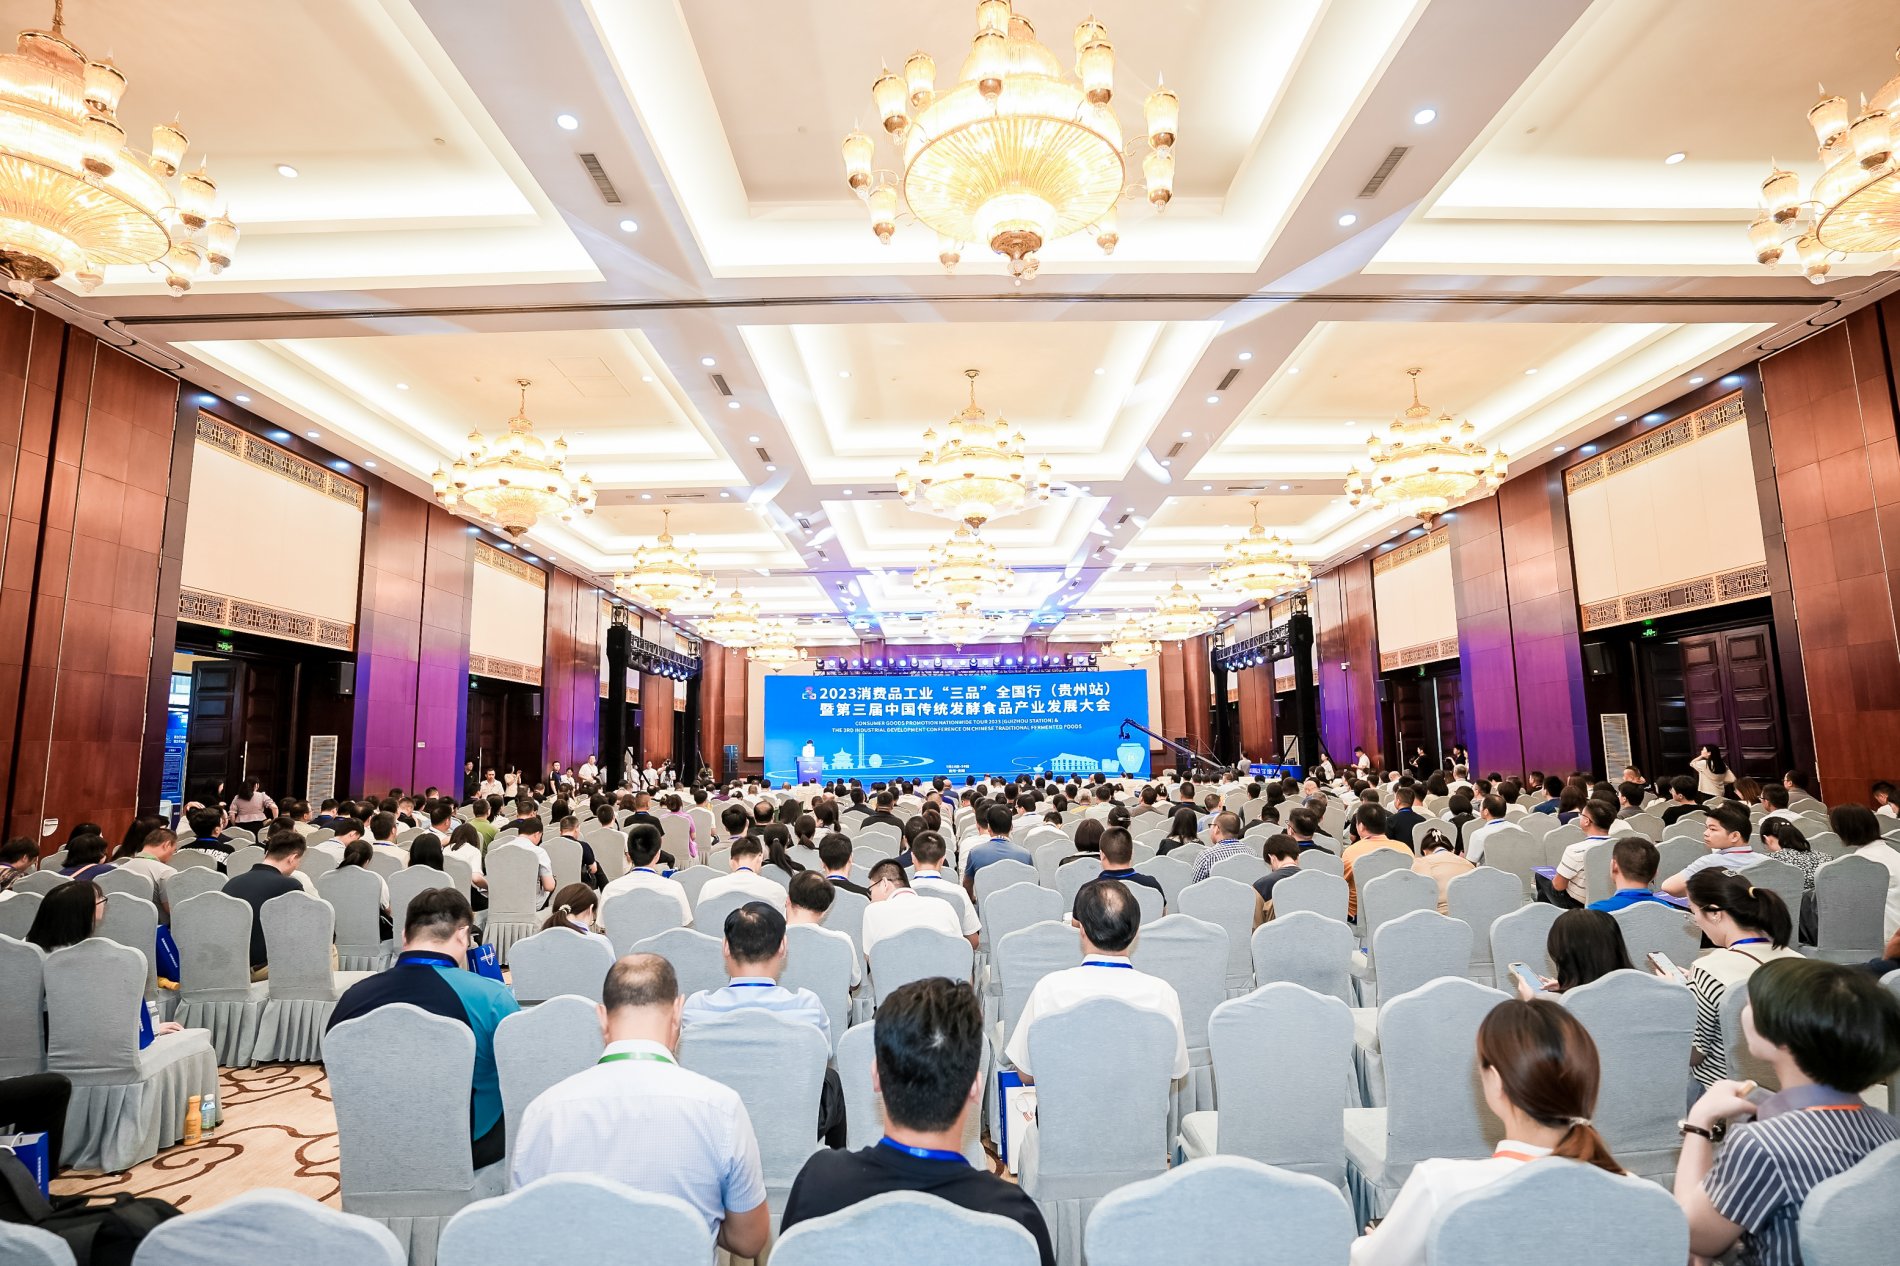 The 3rd China Traditional Fermented Food Industry Development Conference in 2023